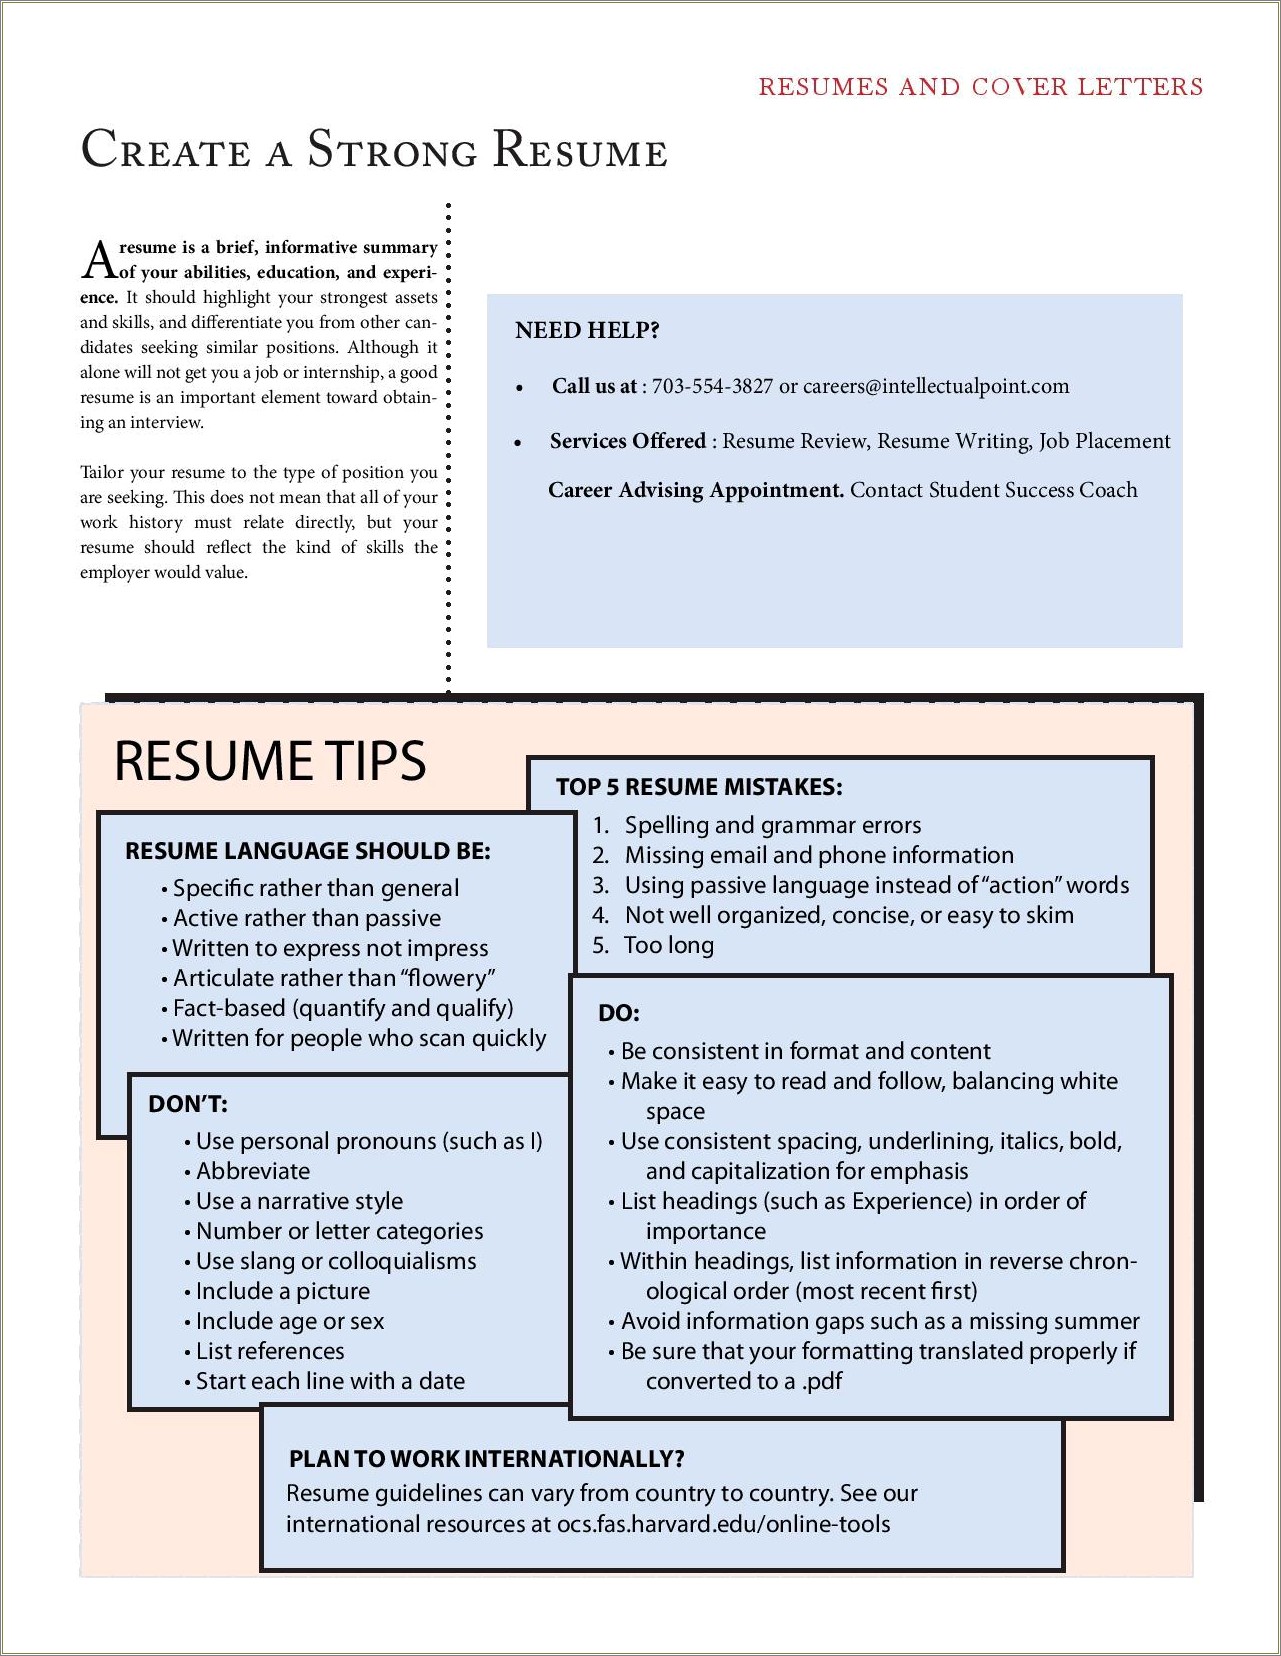 Resume Works Well With Others Or Alone